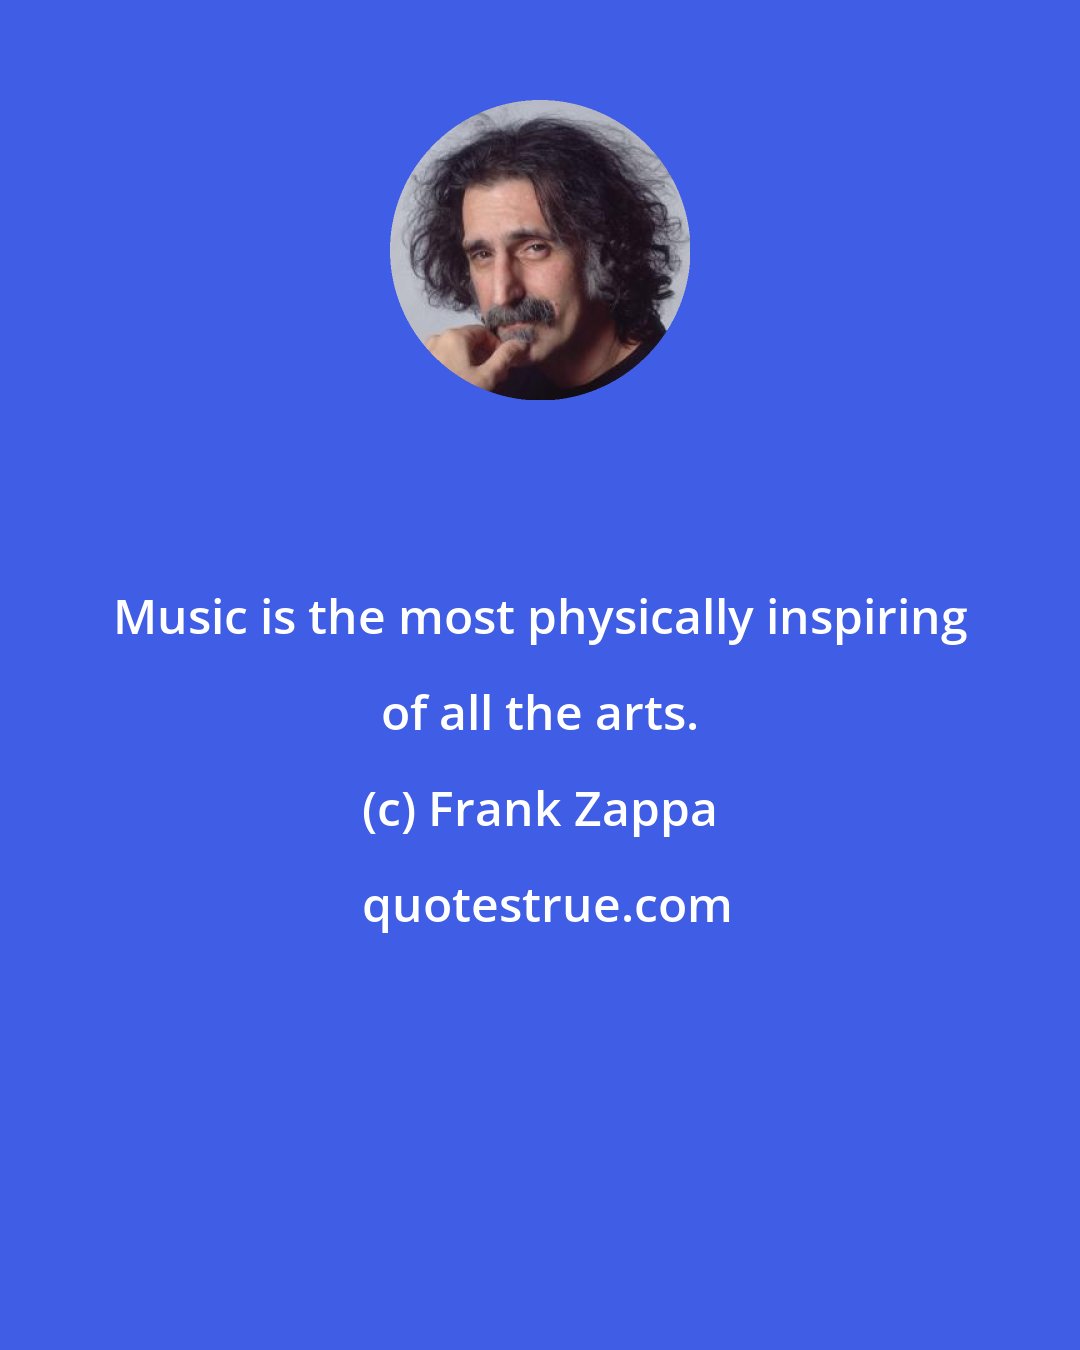 Frank Zappa: Music is the most physically inspiring of all the arts.